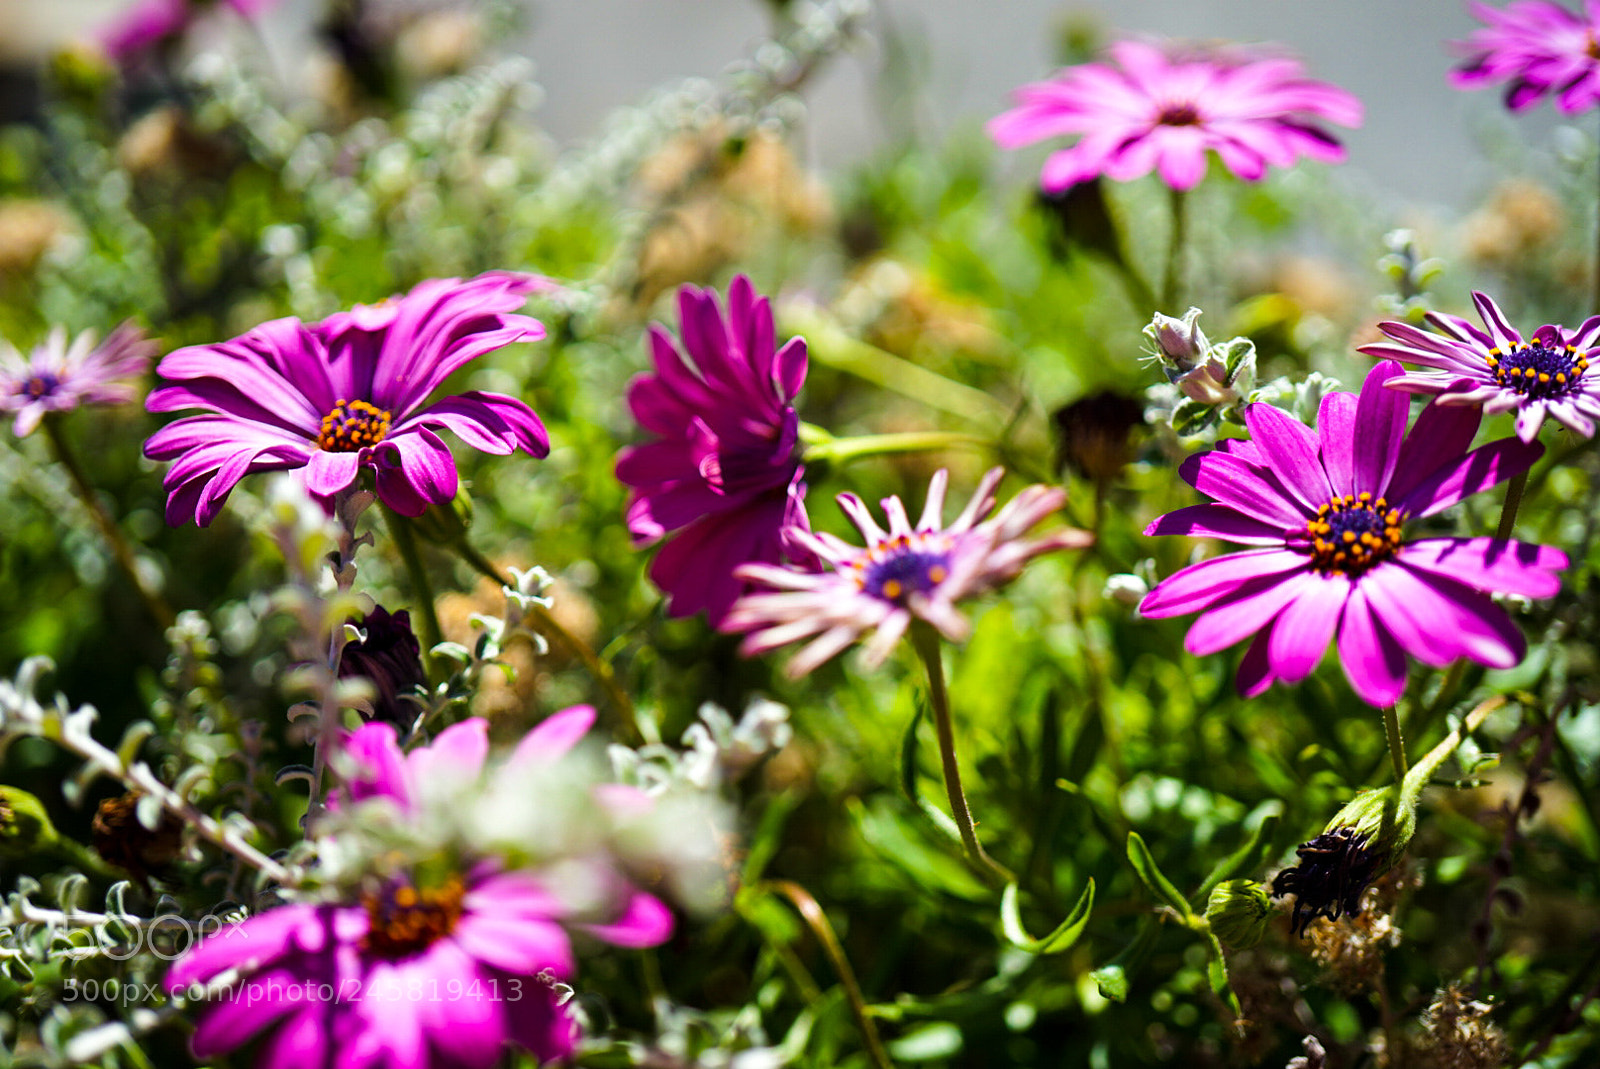 Sony a7 II sample photo. Flowers at moonstone beach photography